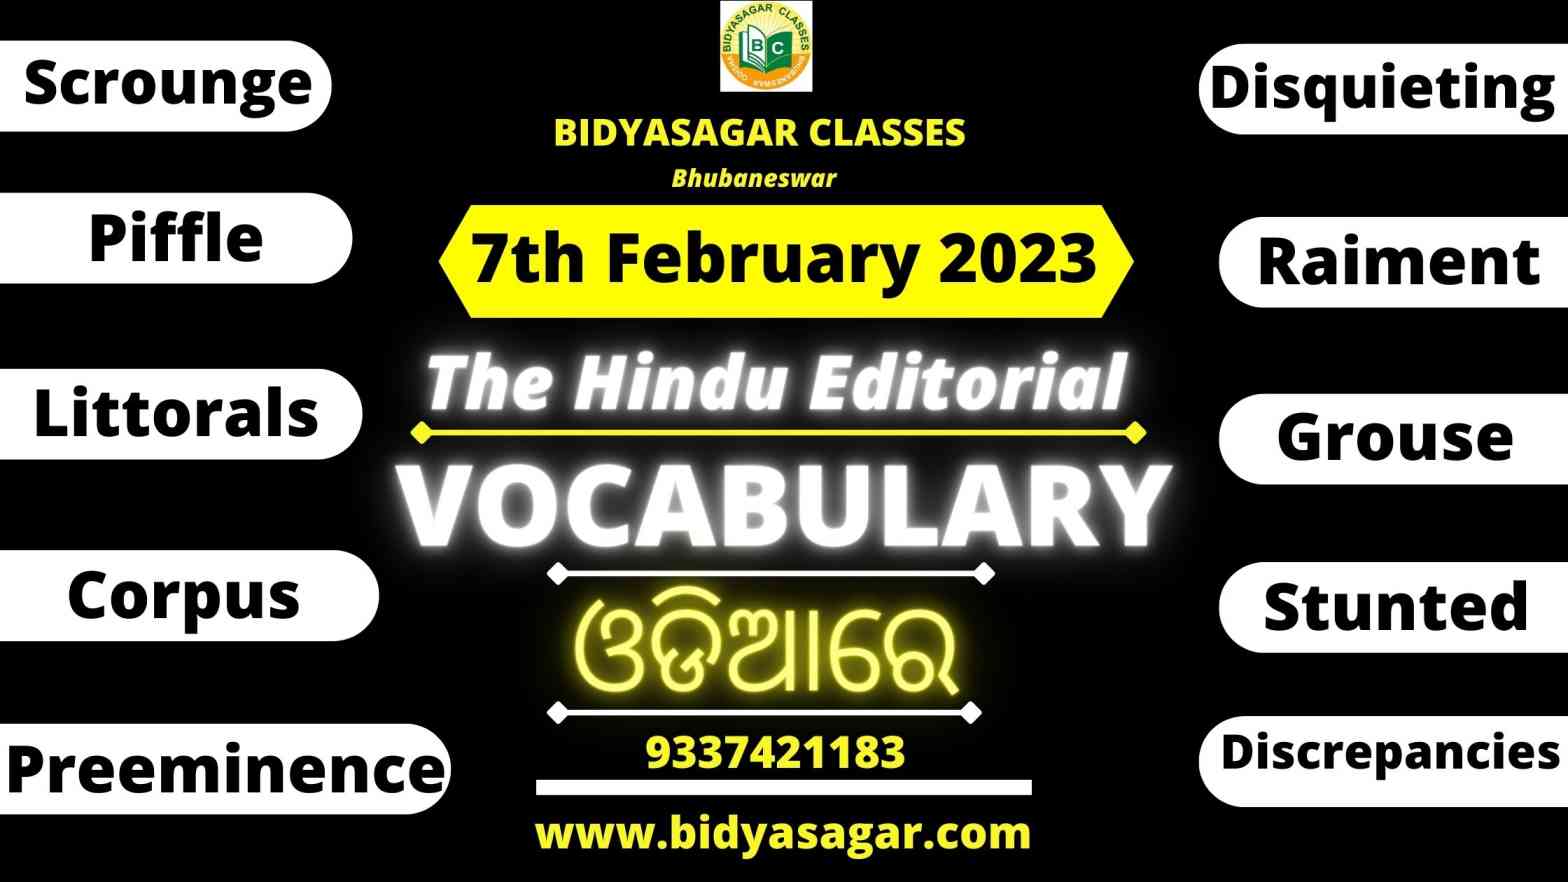 The Hindu Editorial Vocabulary of 7th February 2023